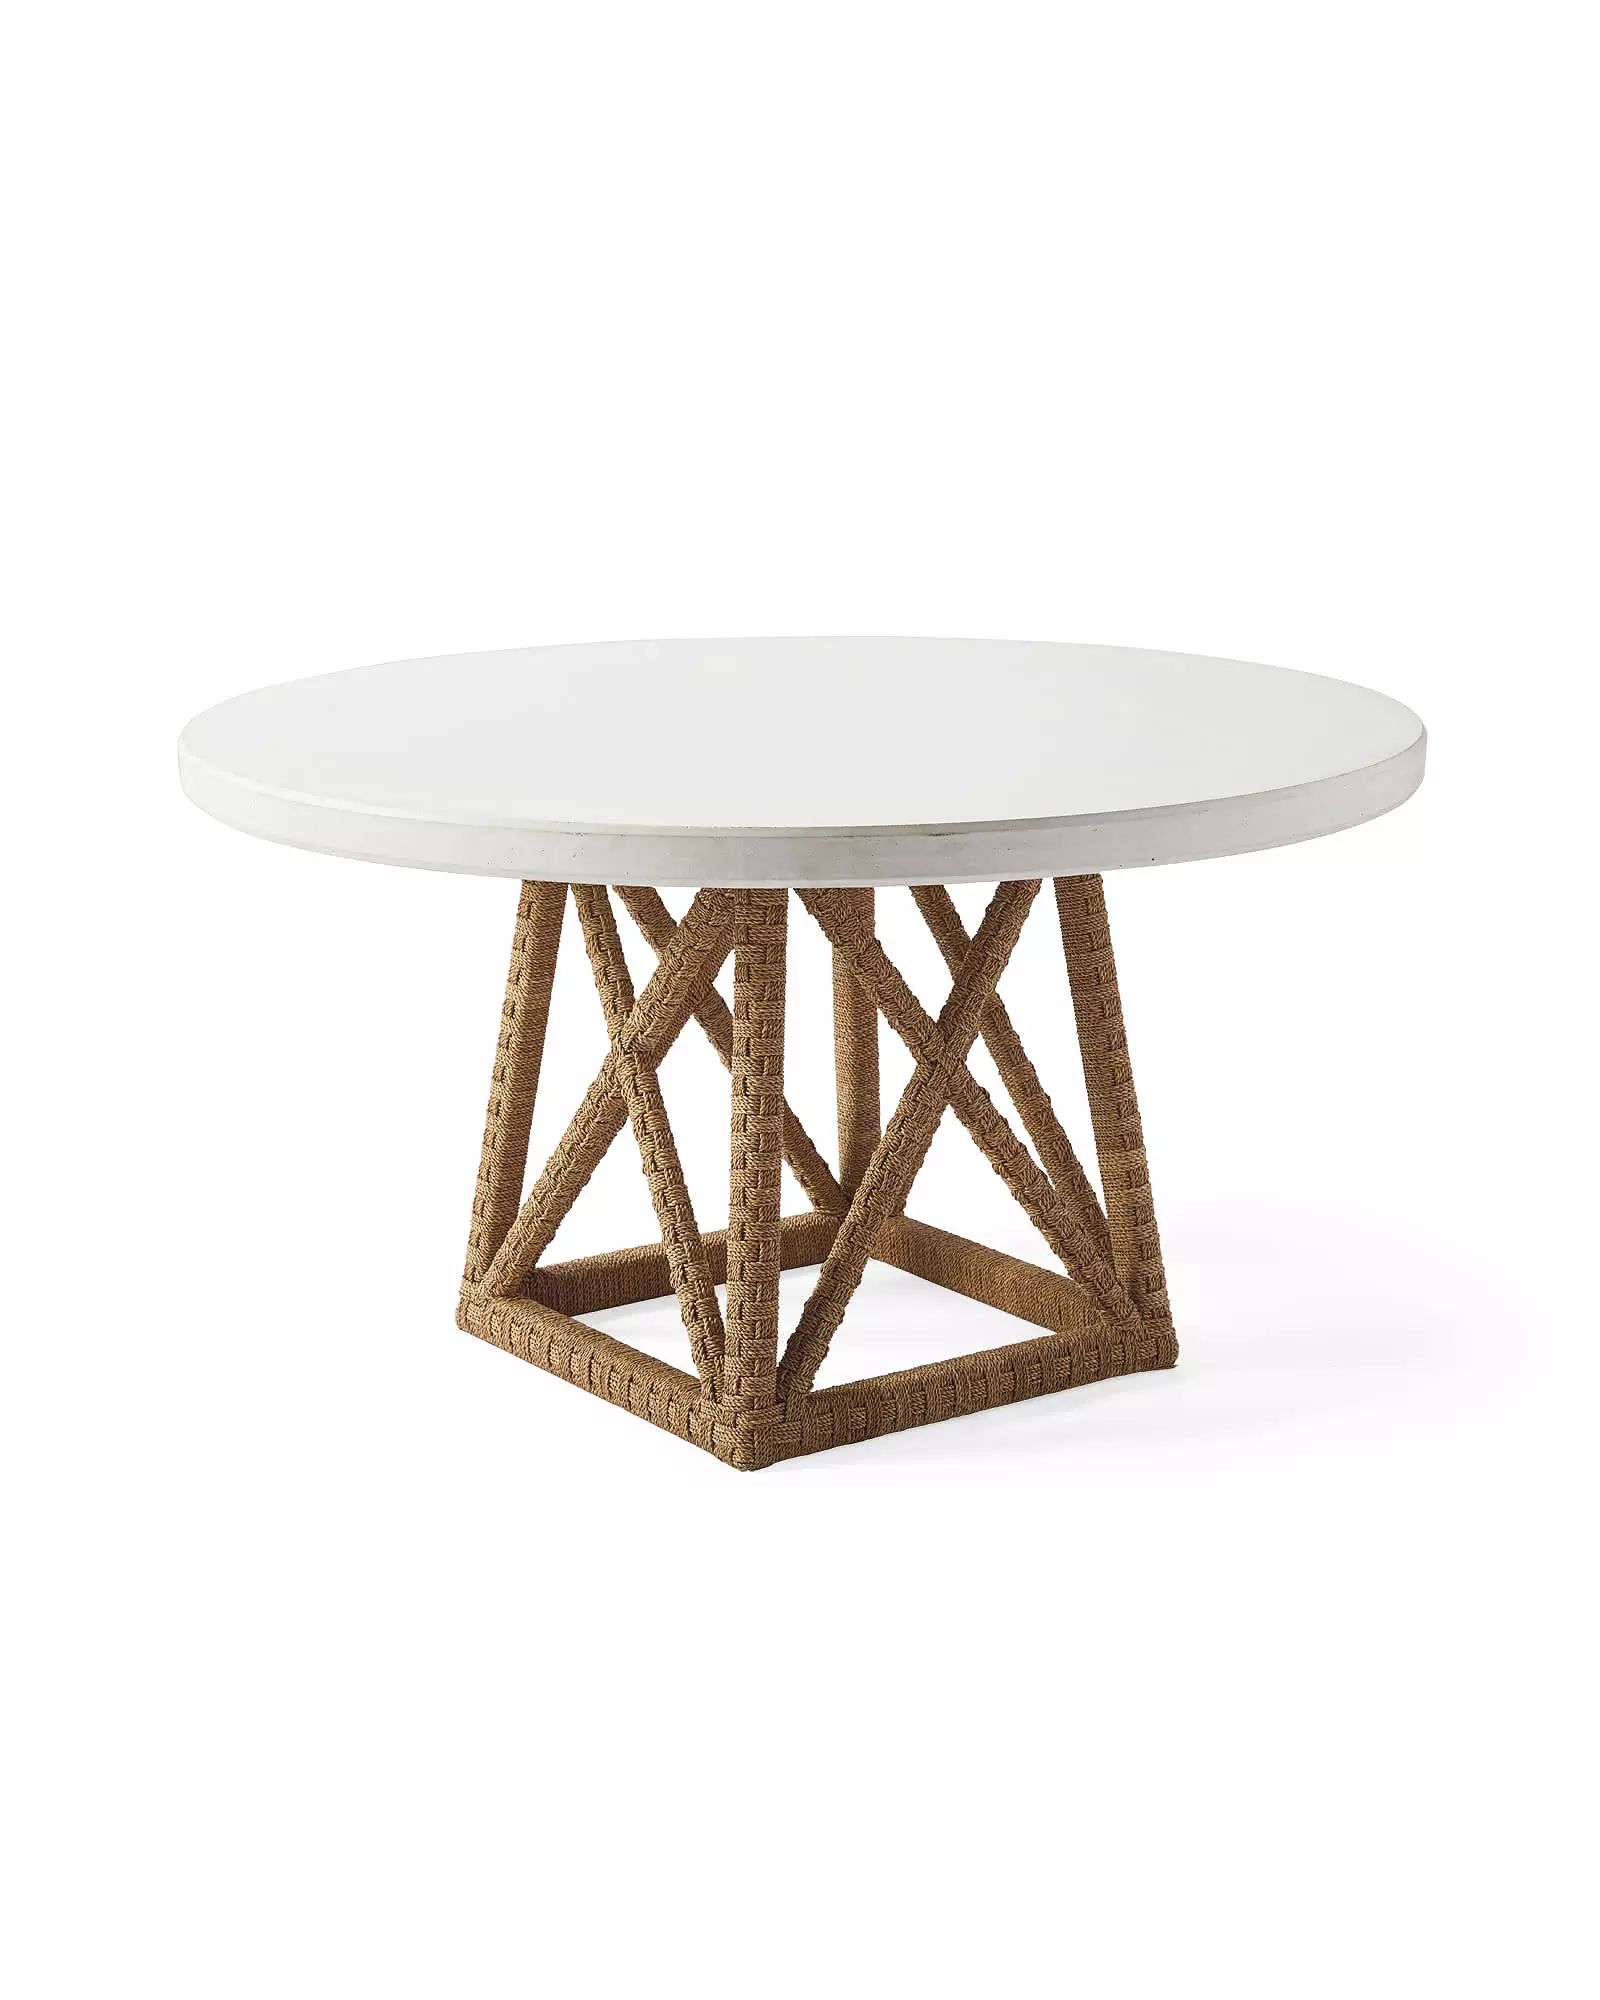 Thornhill Round Dining Table | Serena and Lily